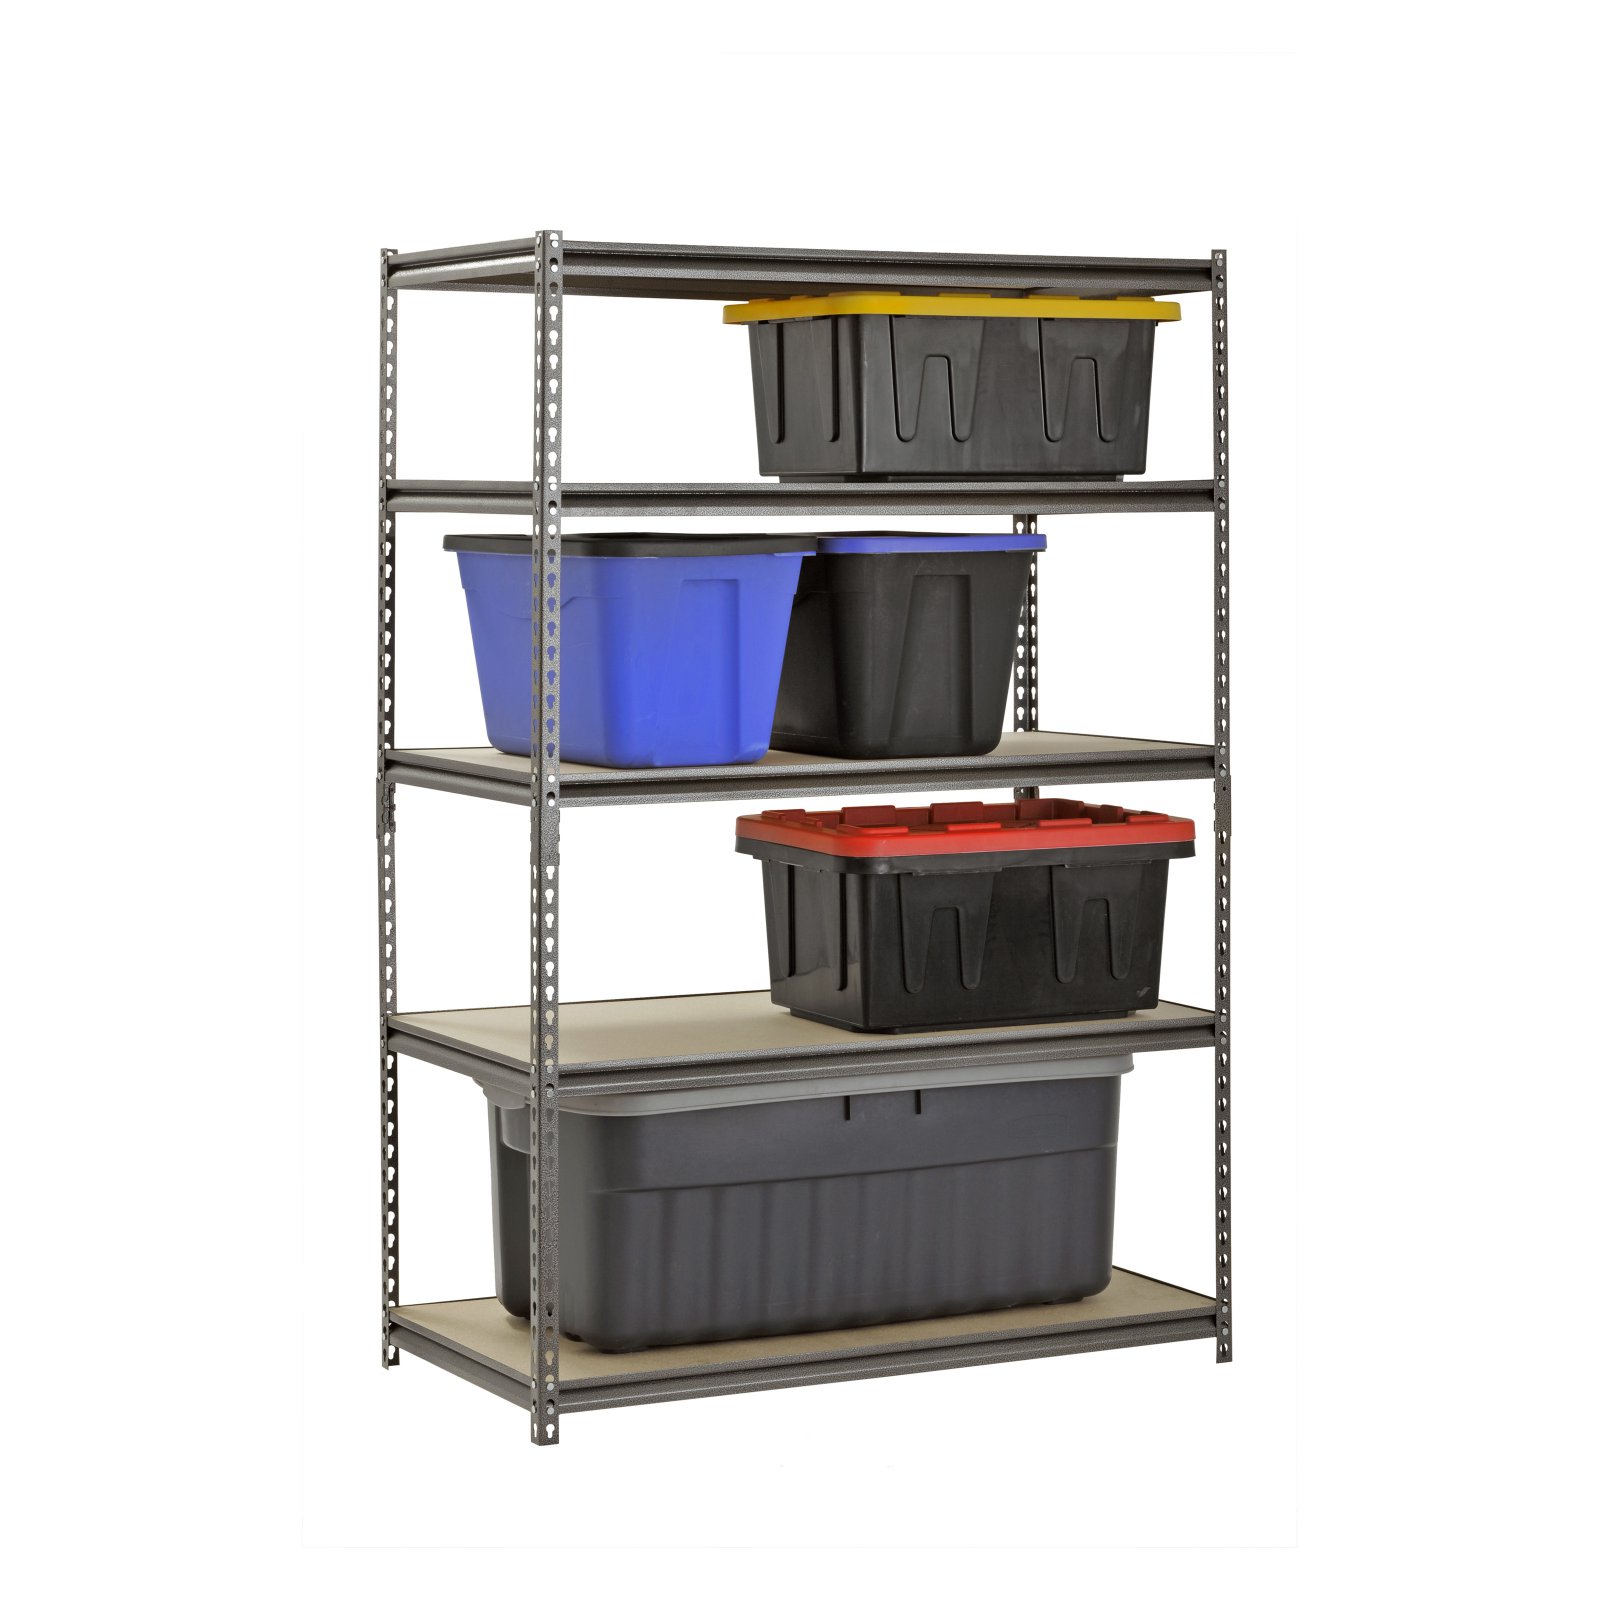 Muscle Rack 48"W x 24"D x 72"H 5-Tier Steel Shelving; 4,000 lb. Total Capacity; Silver - image 4 of 7